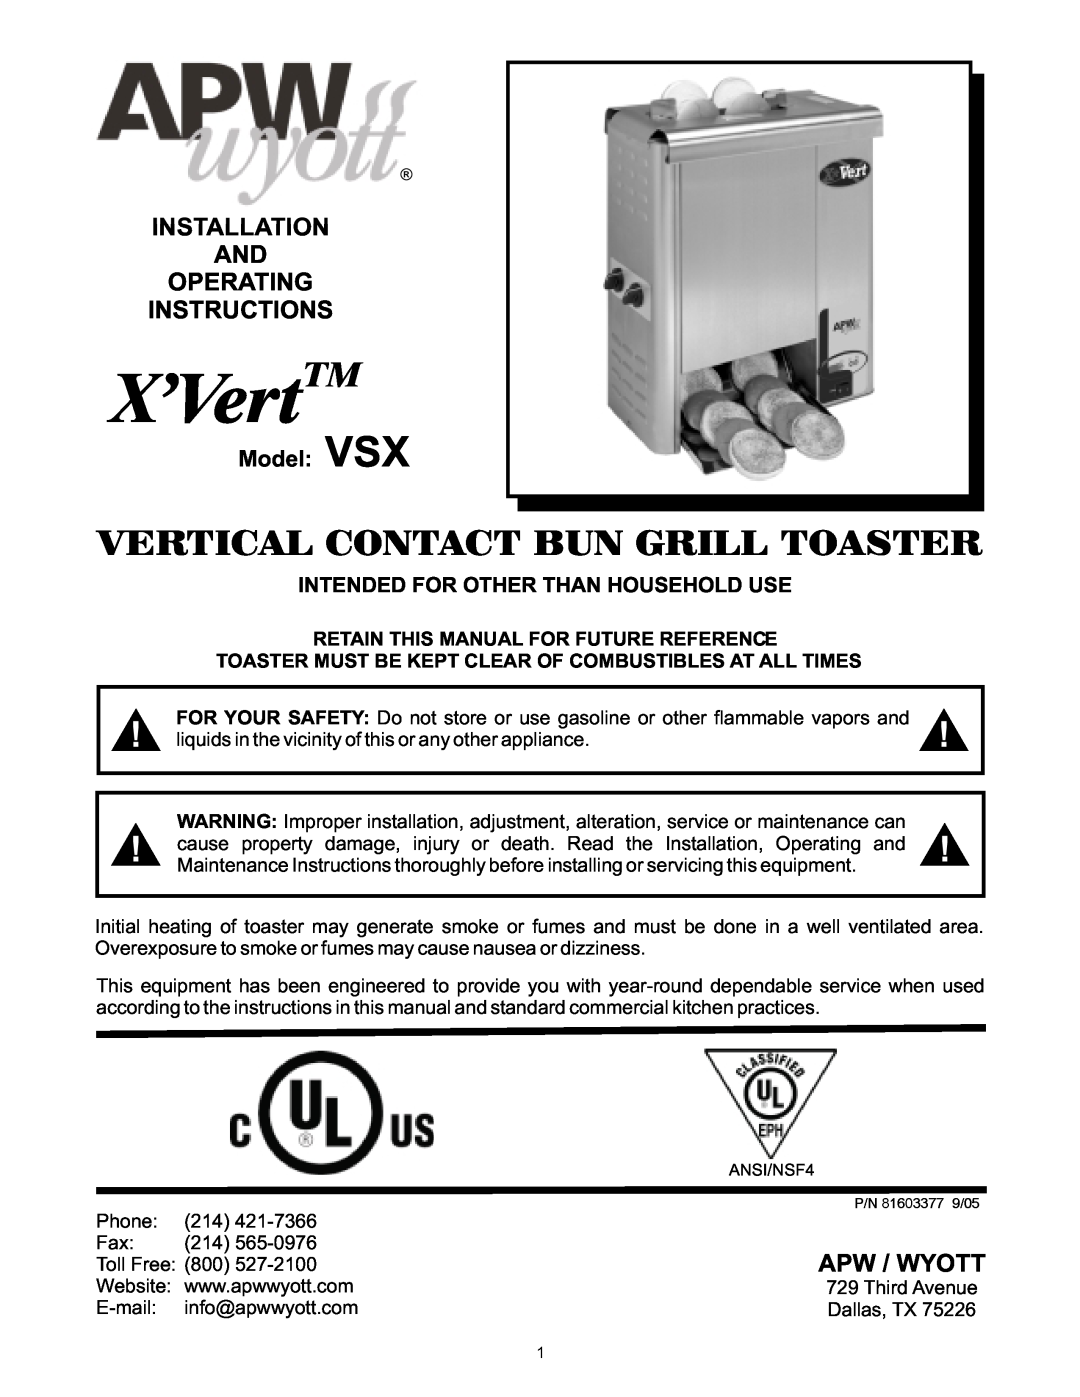 APW Wyott manual Vertical Contact Bun Grill Toaster, Installation And Operating Instructions, X’VertTM, Model VSX 